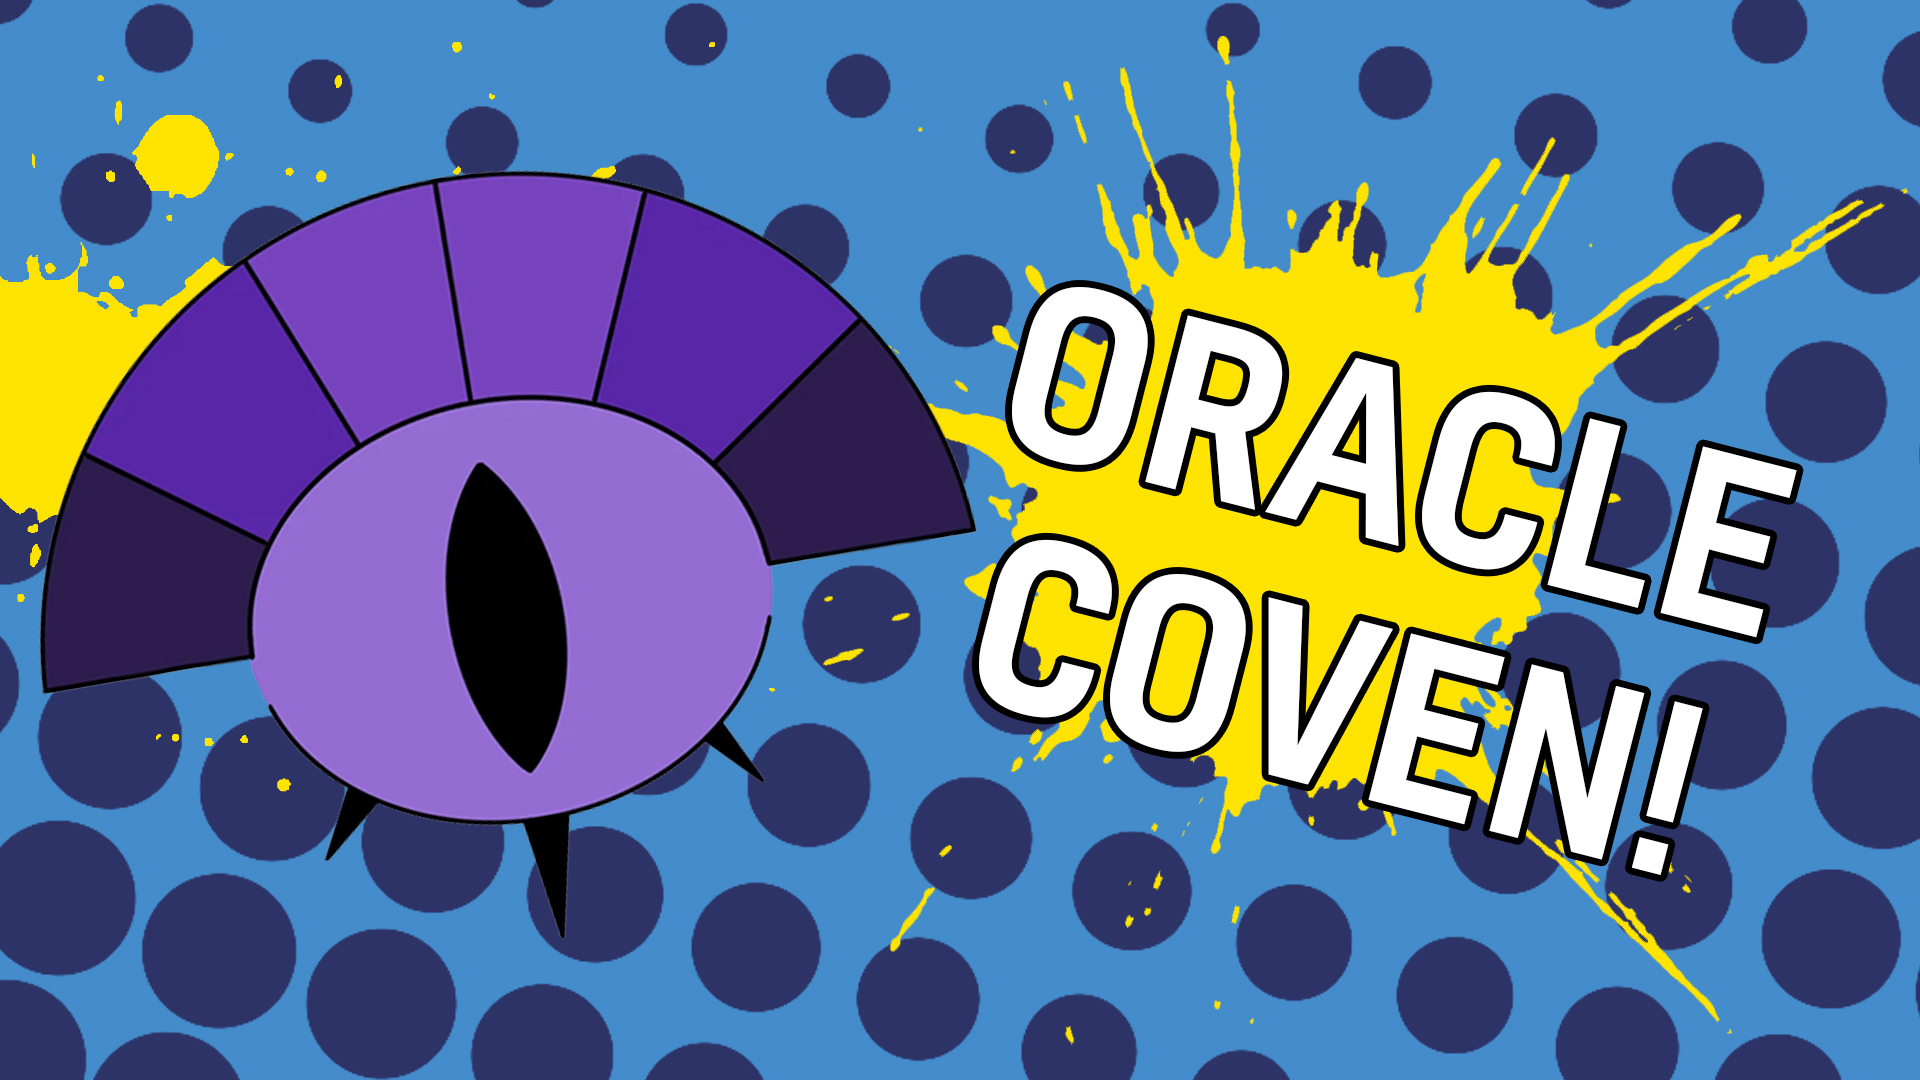 Result: Oracle Coven!